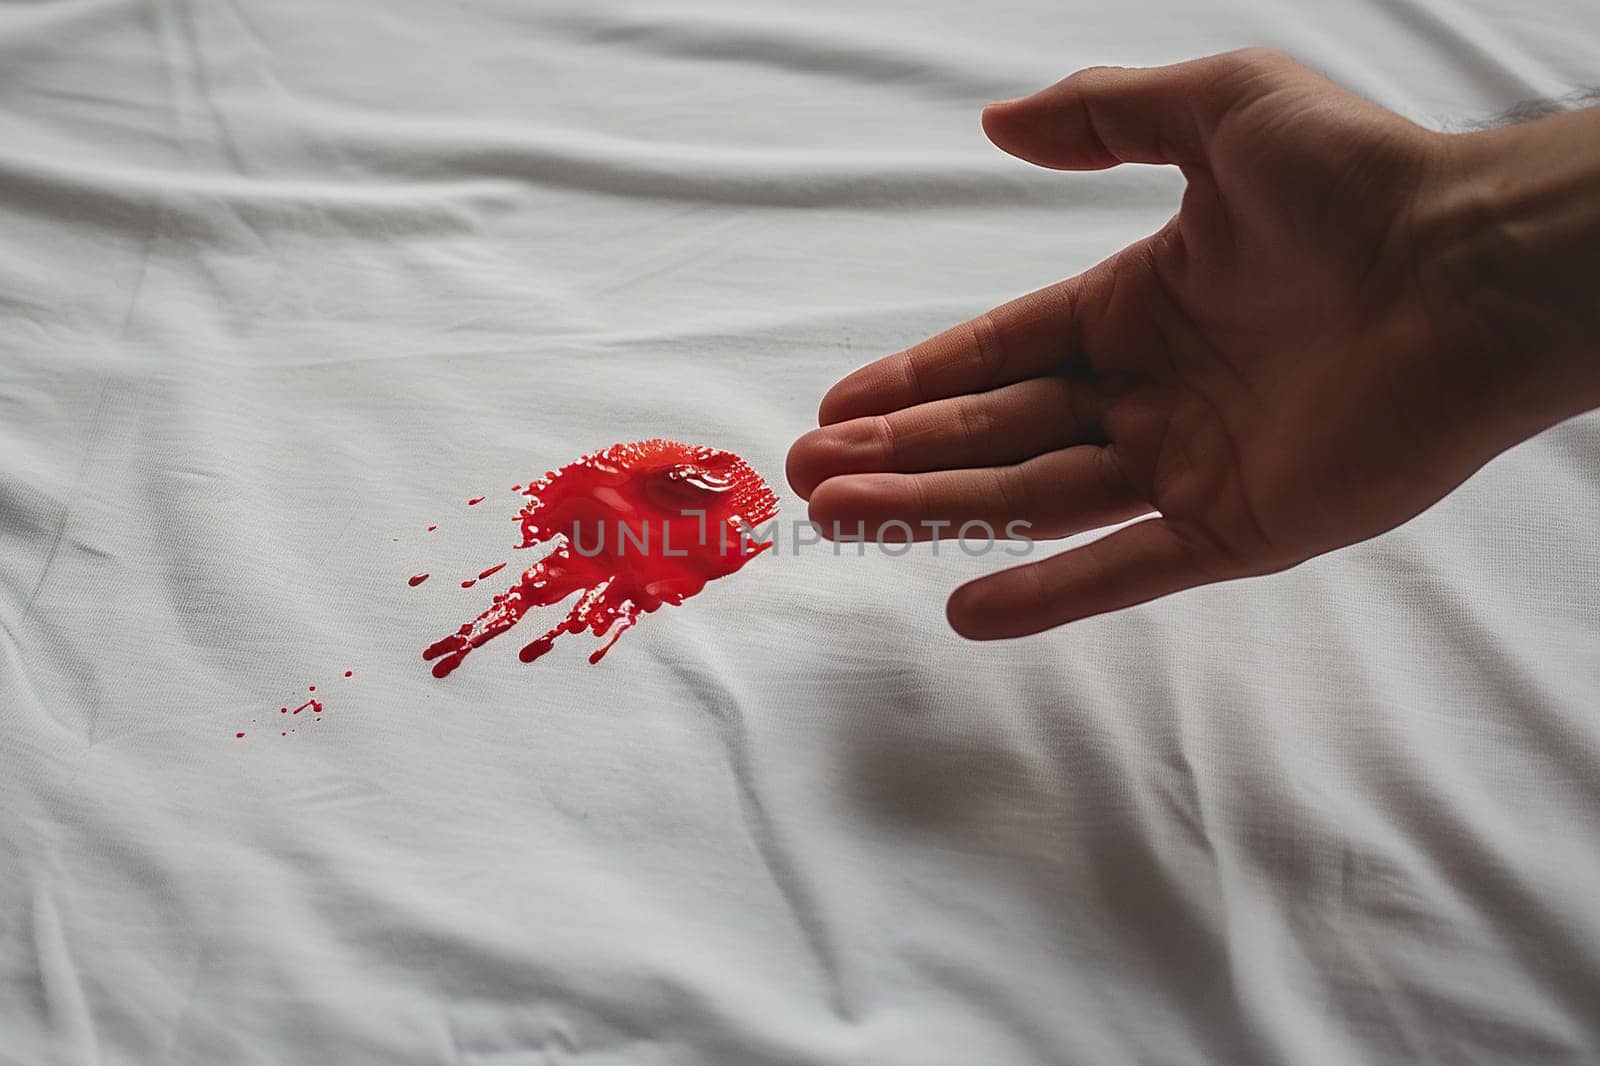 The hand points to a red stain on a white T-shirt.